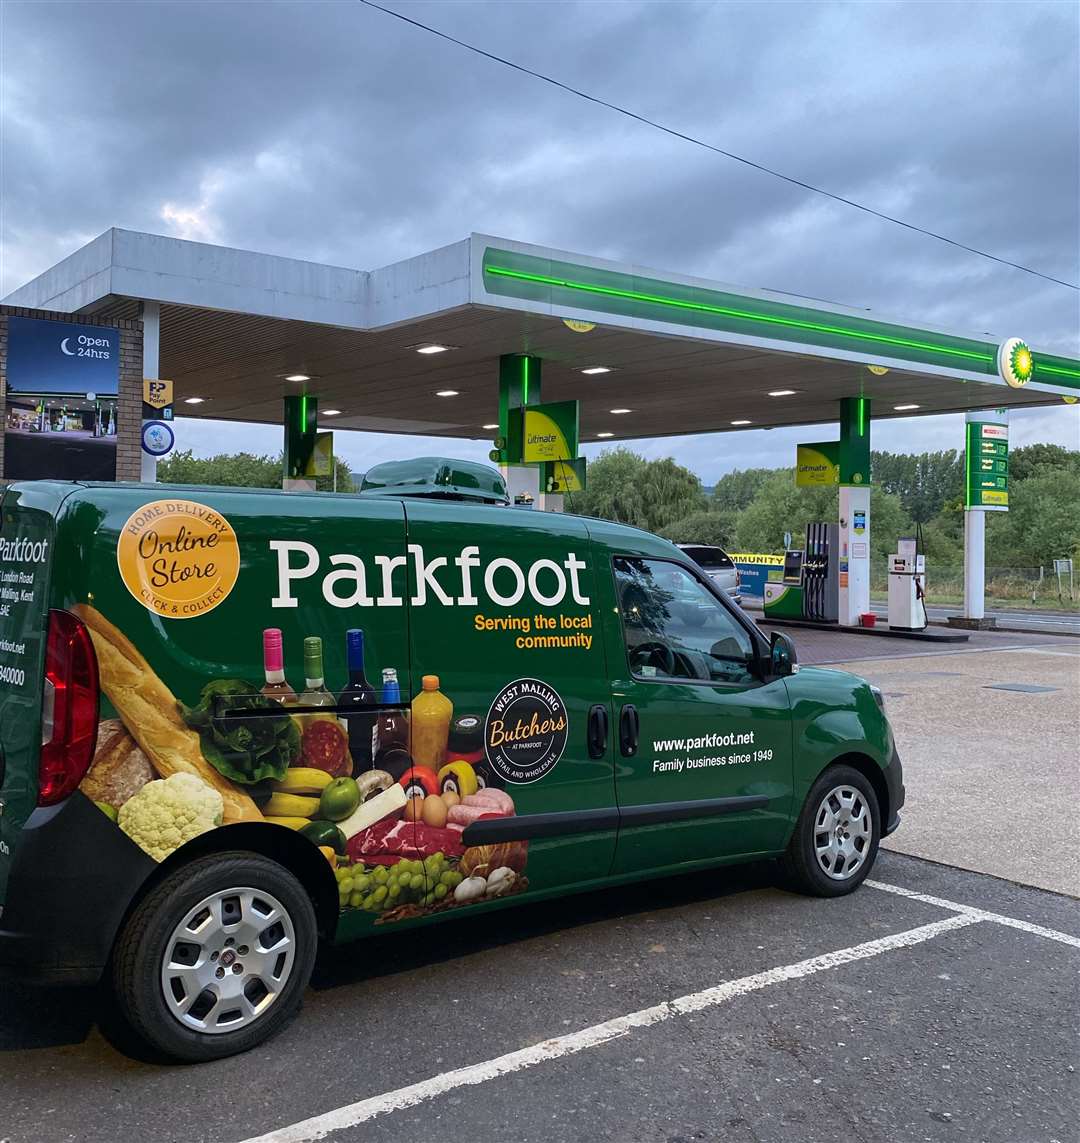 Parkfoot petrol station, in West Malling